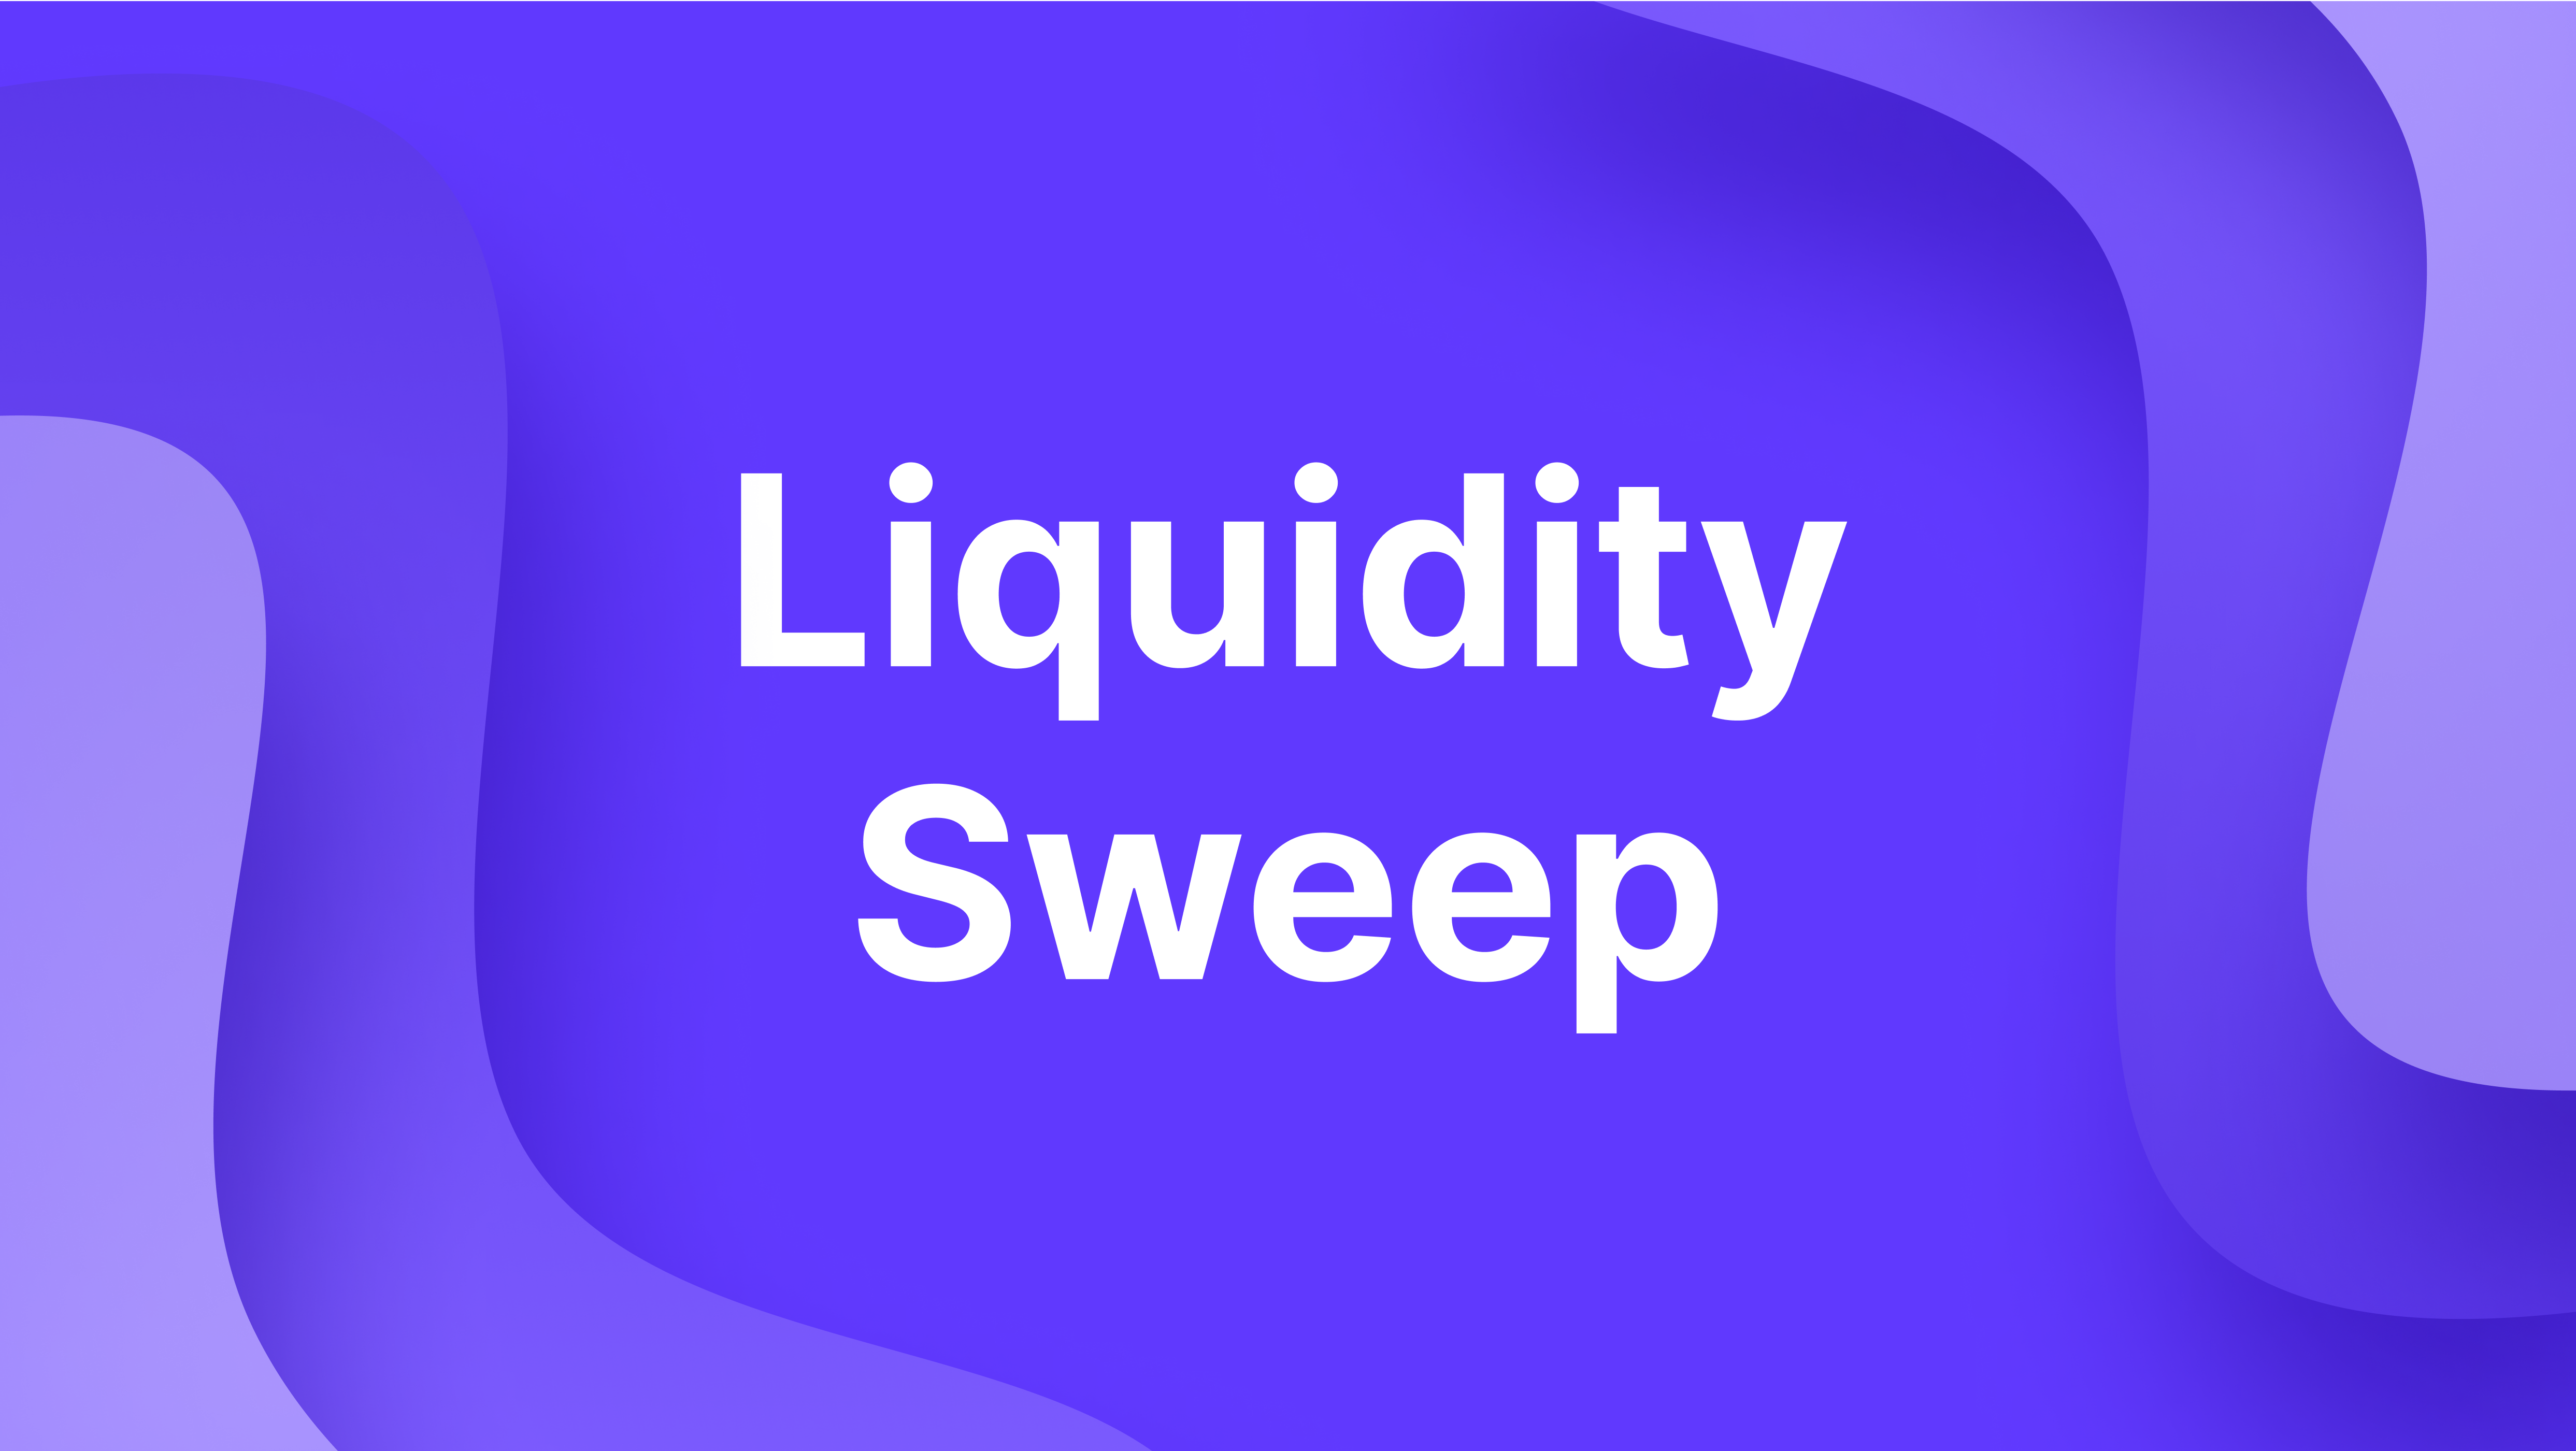 What is a Liquidity Sweep